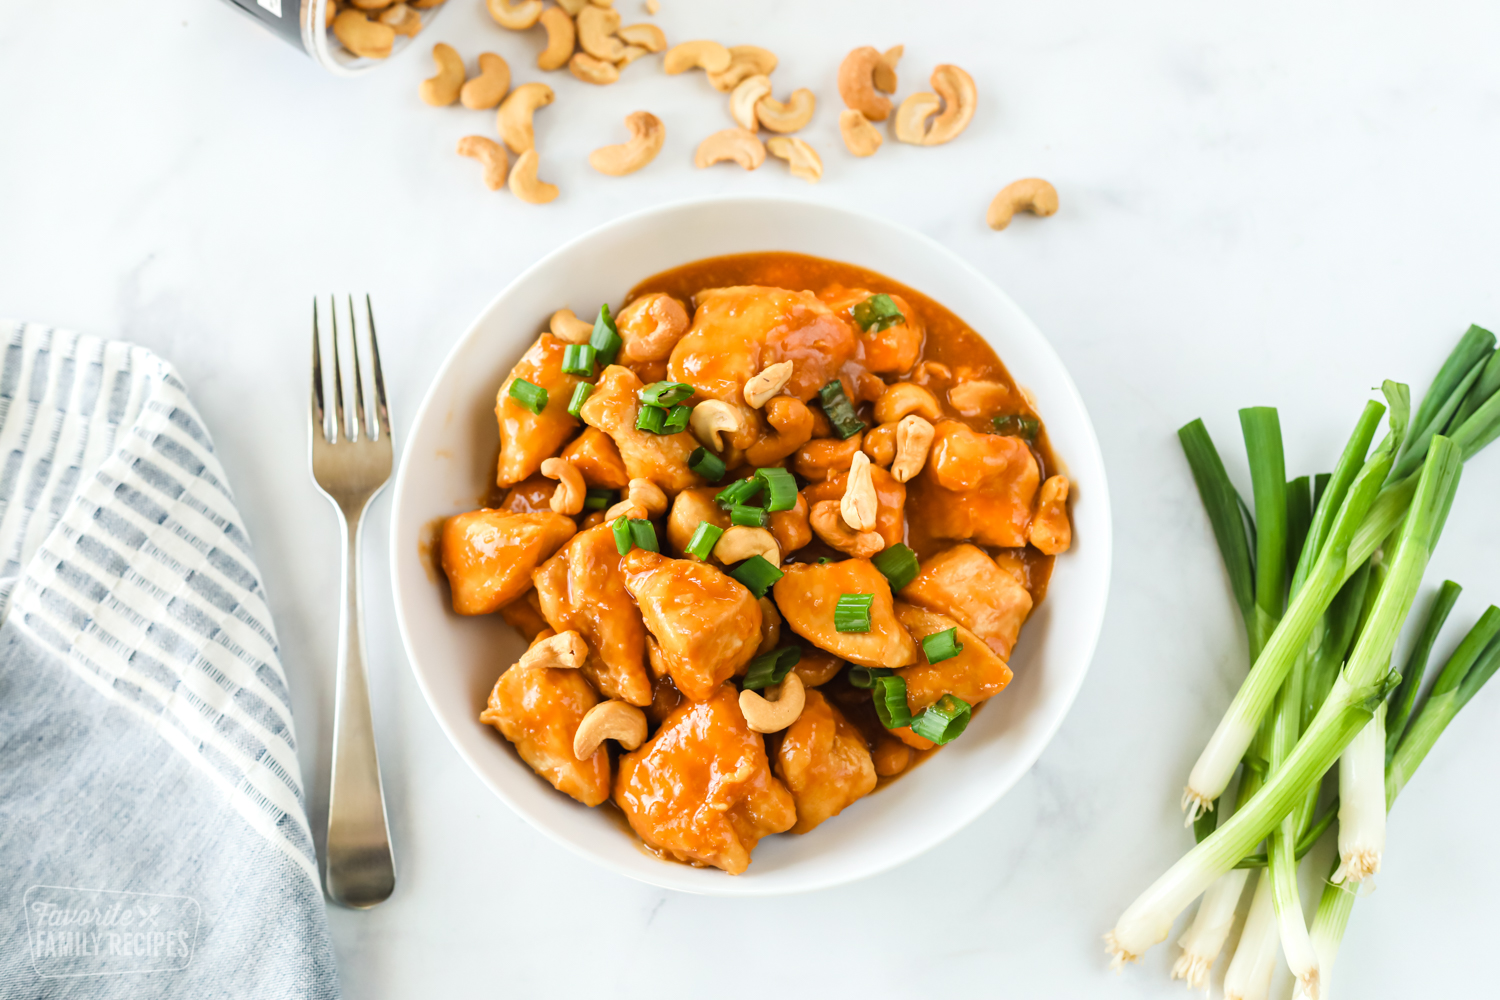 Crock pot chicken in a light sauce made with cashews and green onion